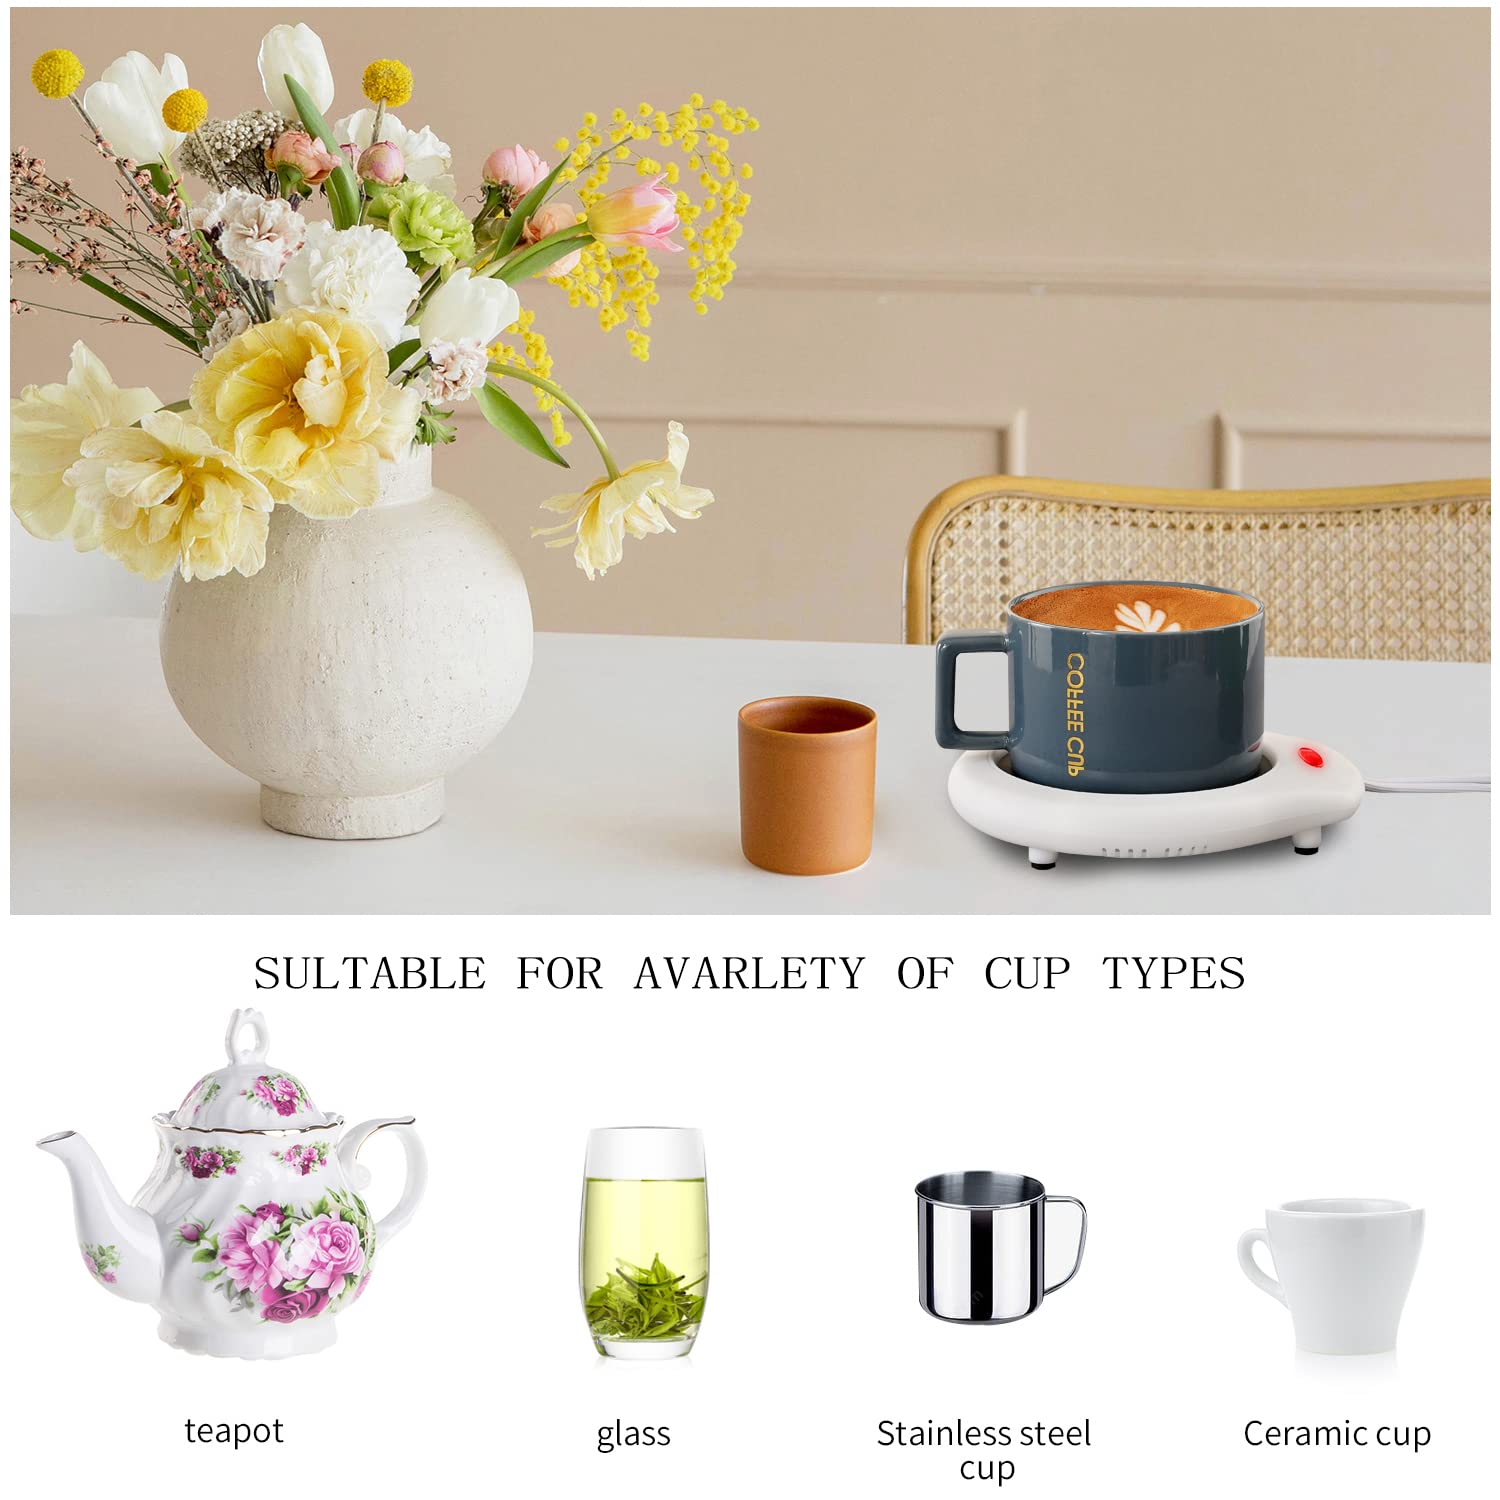 ASAWASA Coffee Mug Warmer, Candle Warmers for Large Jar, Safely Releases Scents Without a Flame, Enjoy Your Warm Coffee Tea and Milk, Gifts for Festival Birthday Men Women Mom Dad.